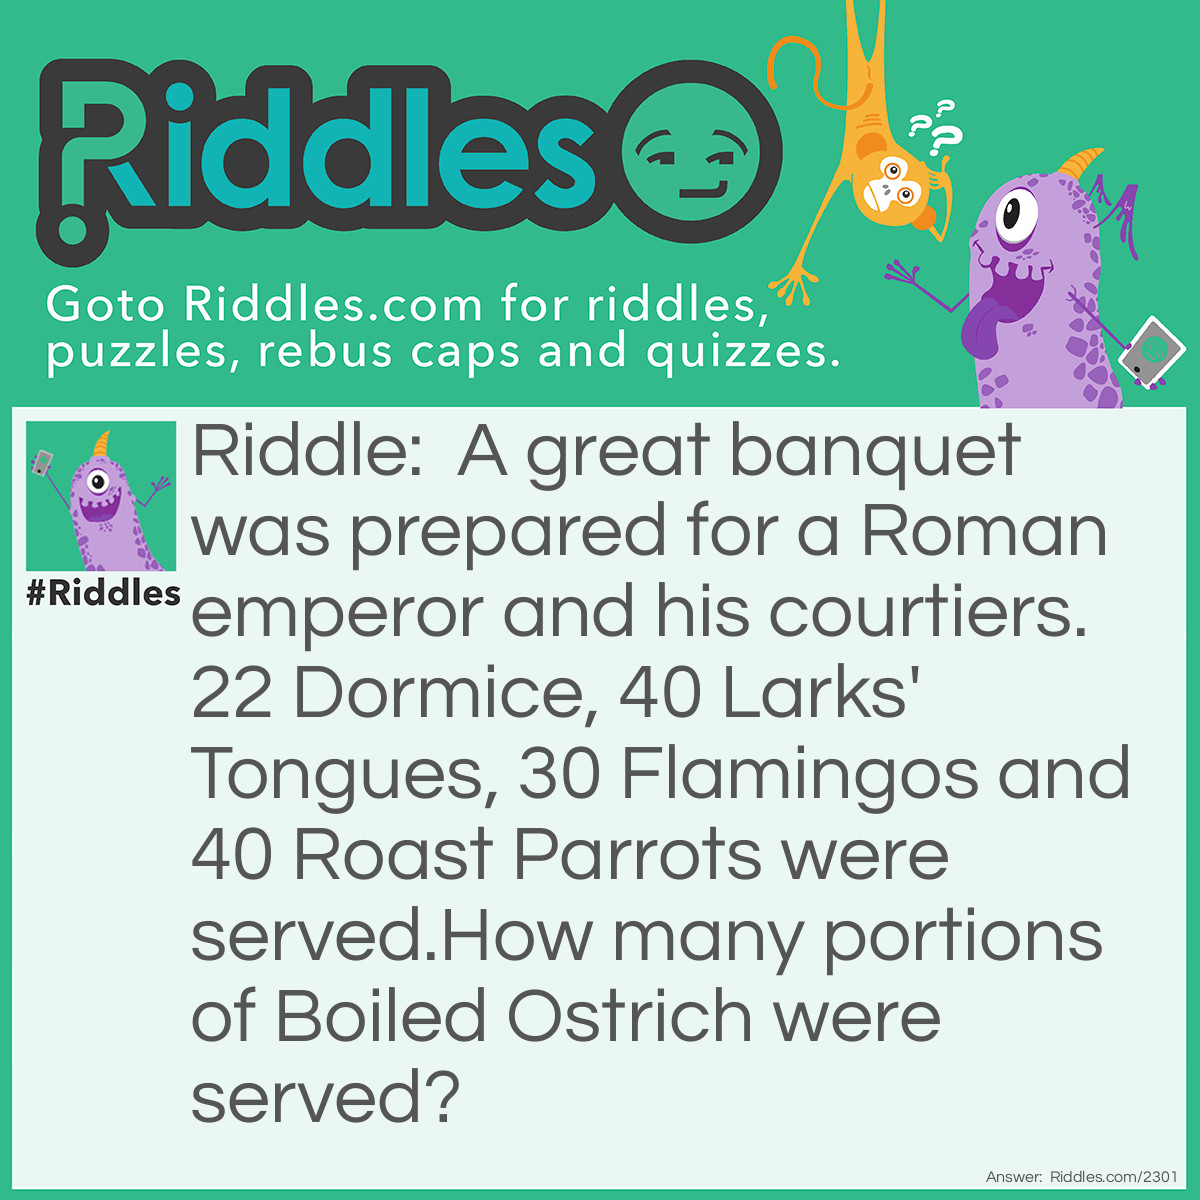 Riddle: A great banquet was prepared for a Roman emperor and his courtiers. 22 Dormice, 40 Larks' Tongues, 30 Flamingos and 40 Roast Parrots were served.
How many portions of Boiled Ostrich were served? Answer: 42. Each vowel is worth 2 and each consonant 4, so Dormice gives 22, ect.